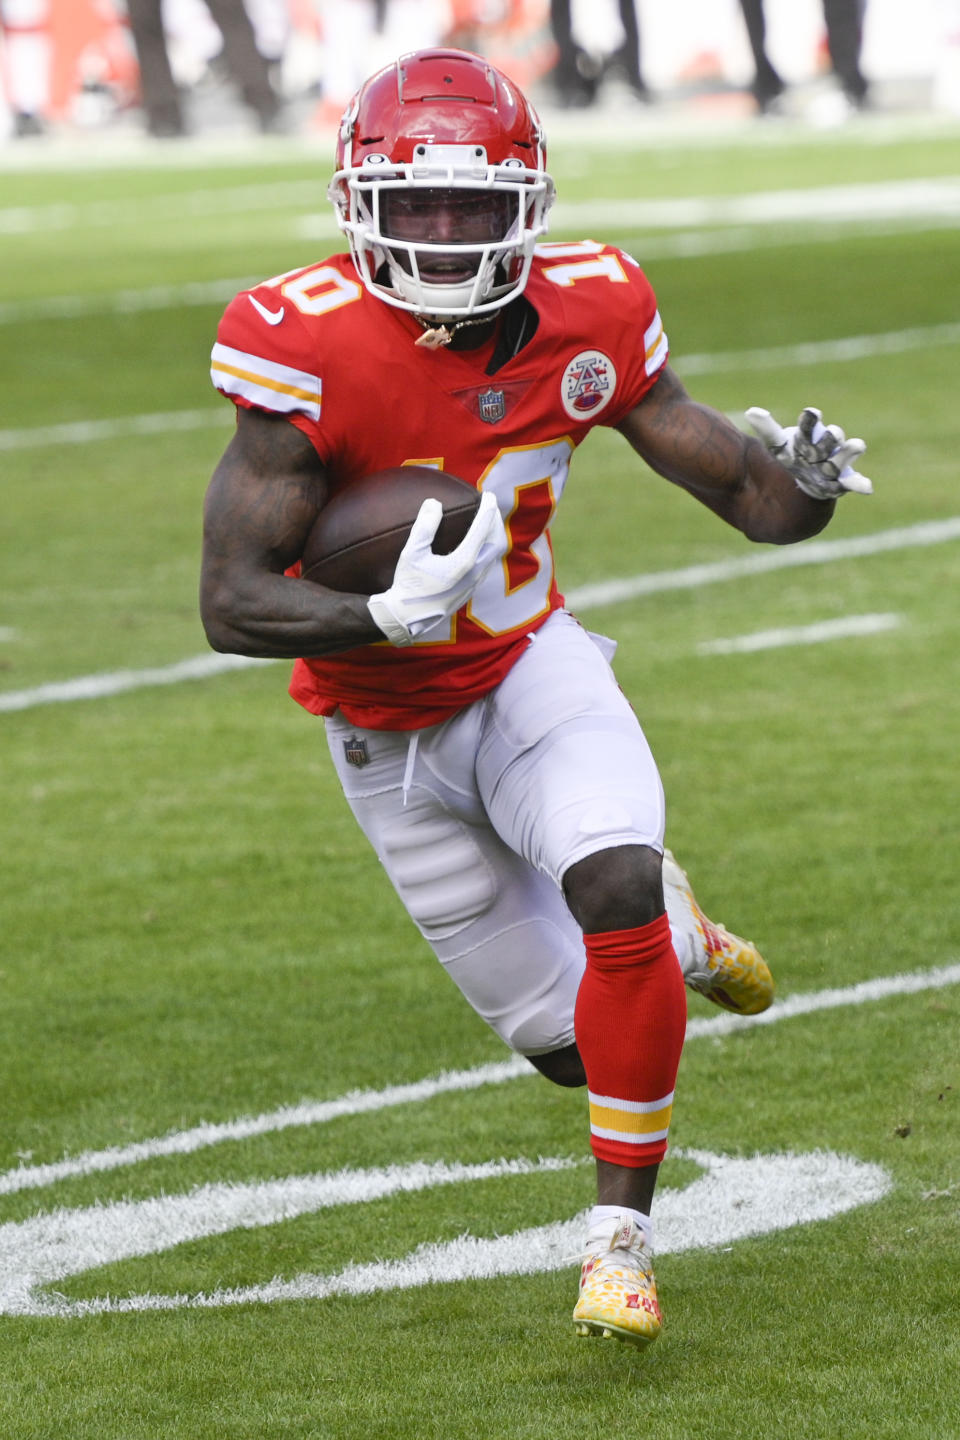 FILE - In this Jan. 17, 2021, file photo, Kansas City Chiefs wide receiver Tyreek Hill (10) runs against the Cleveland Browns during the NFL divisional round football game in Kansas City, Mo. Hill wants to be the Super Bowl halftime show. Hill said Monday, Feb. 1, 2021, he’d be willing to race Tampa Bay receiver Scotty Miller during intermission at Raymond James Stadium on Sunday. (AP Photo/Reed Hoffmann, File)